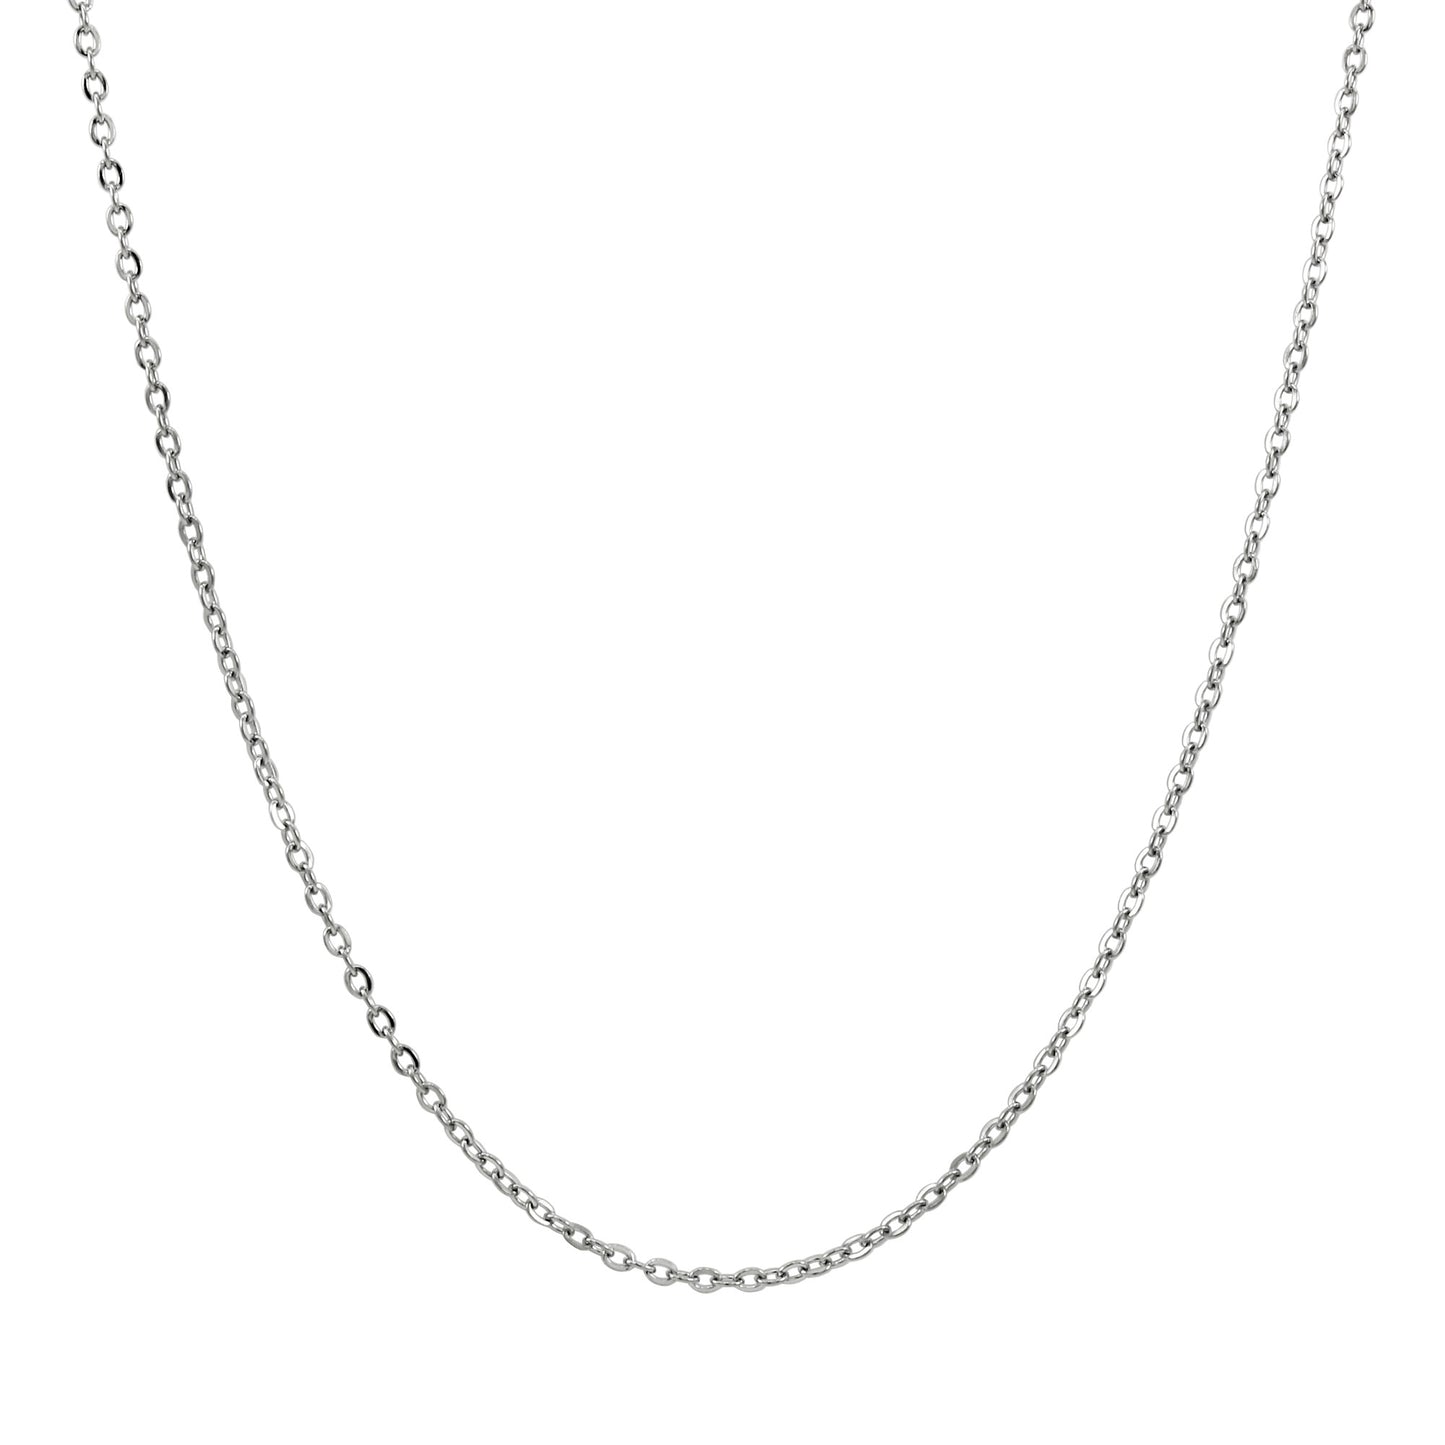 925 Sterling Silver Snowmobile Necklace With 22" Hypoallergenic Cable Chain Necklace